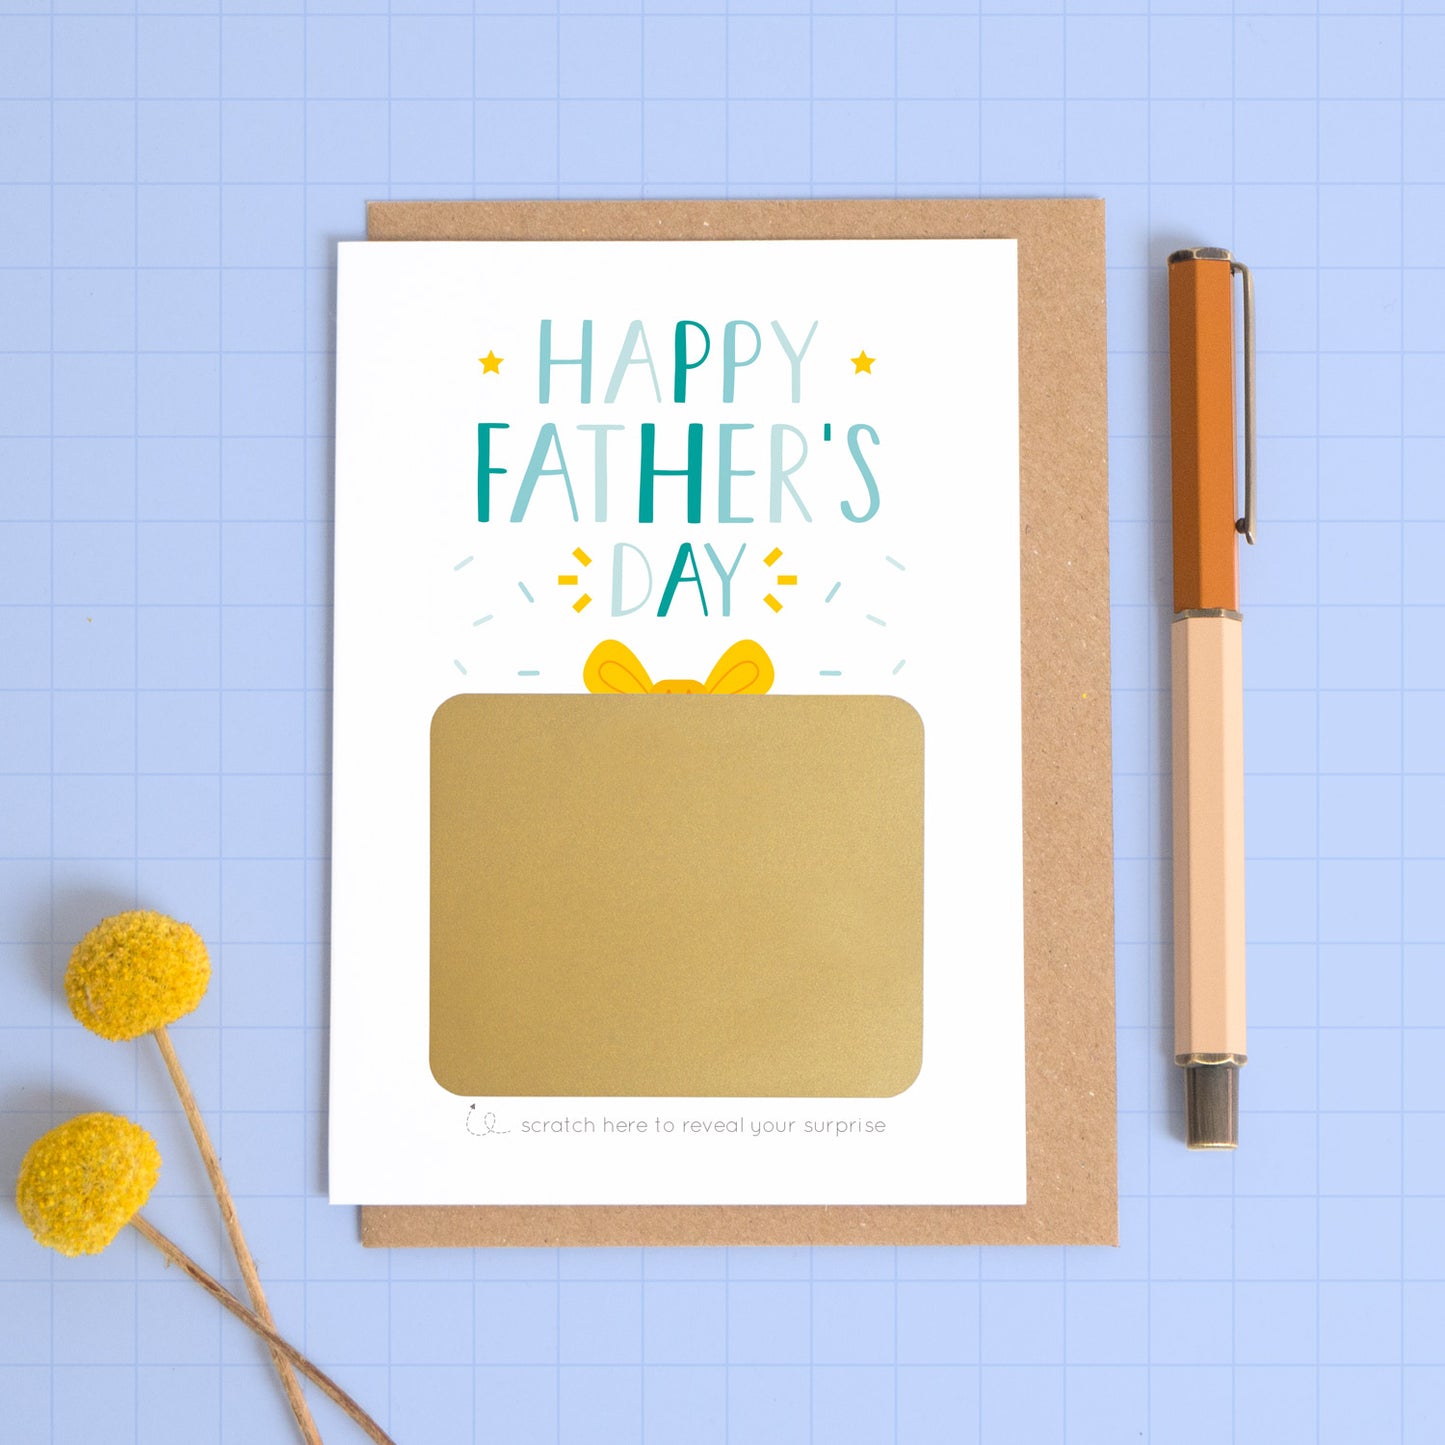 A personalised Father’s day scratch card photographed on a blue background with a pop of yellow flowers and a pen for scale. This image shows the blue version of the card with the golden present not yet scratched off. This is how the card will arrive.